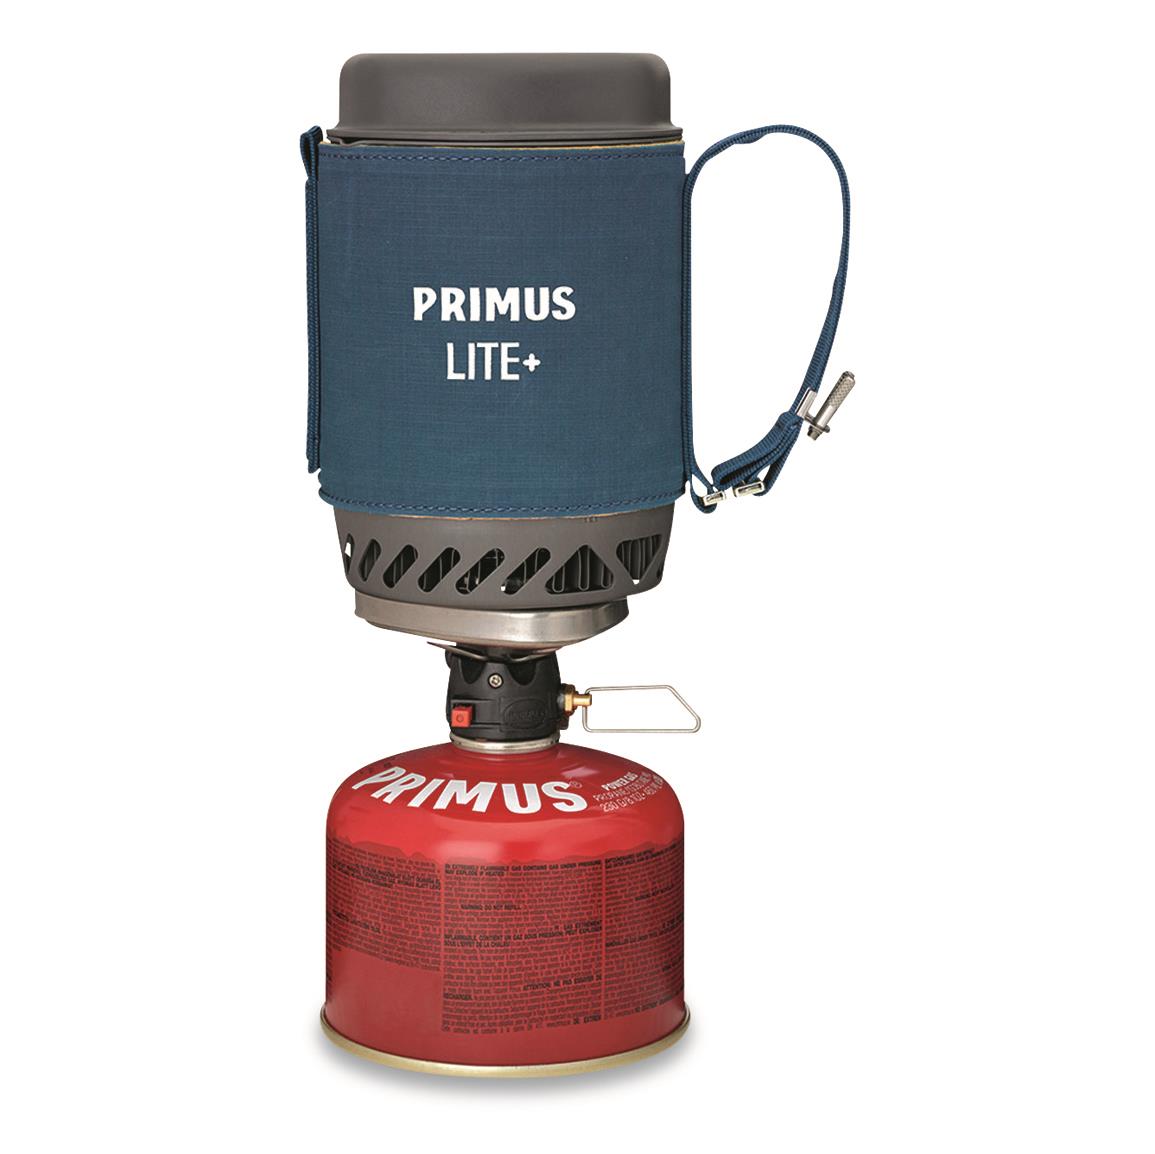 Primus Lite Plus Backpacking Stove System, Blue